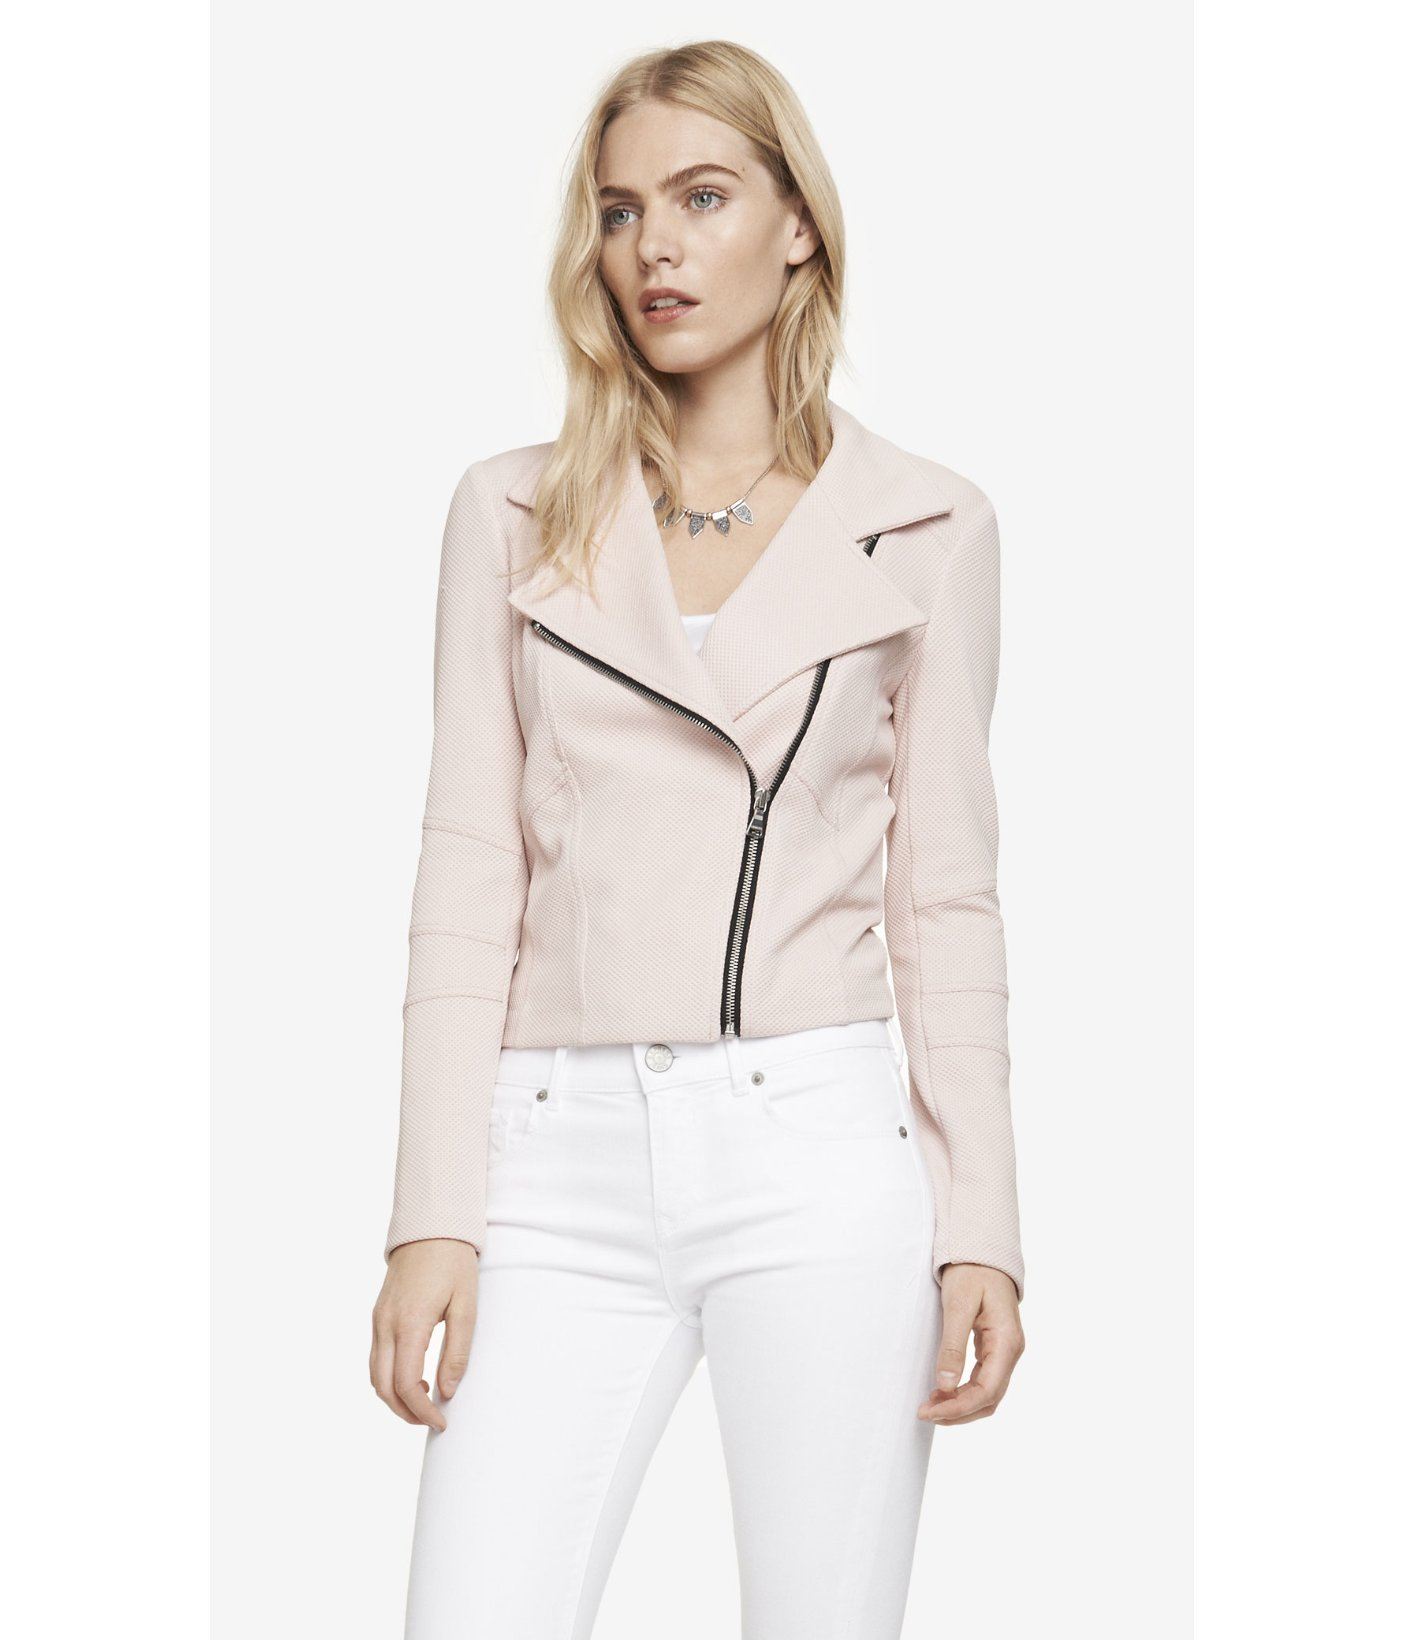 Lyst Express Textured Knit Moto Jacket in Pink